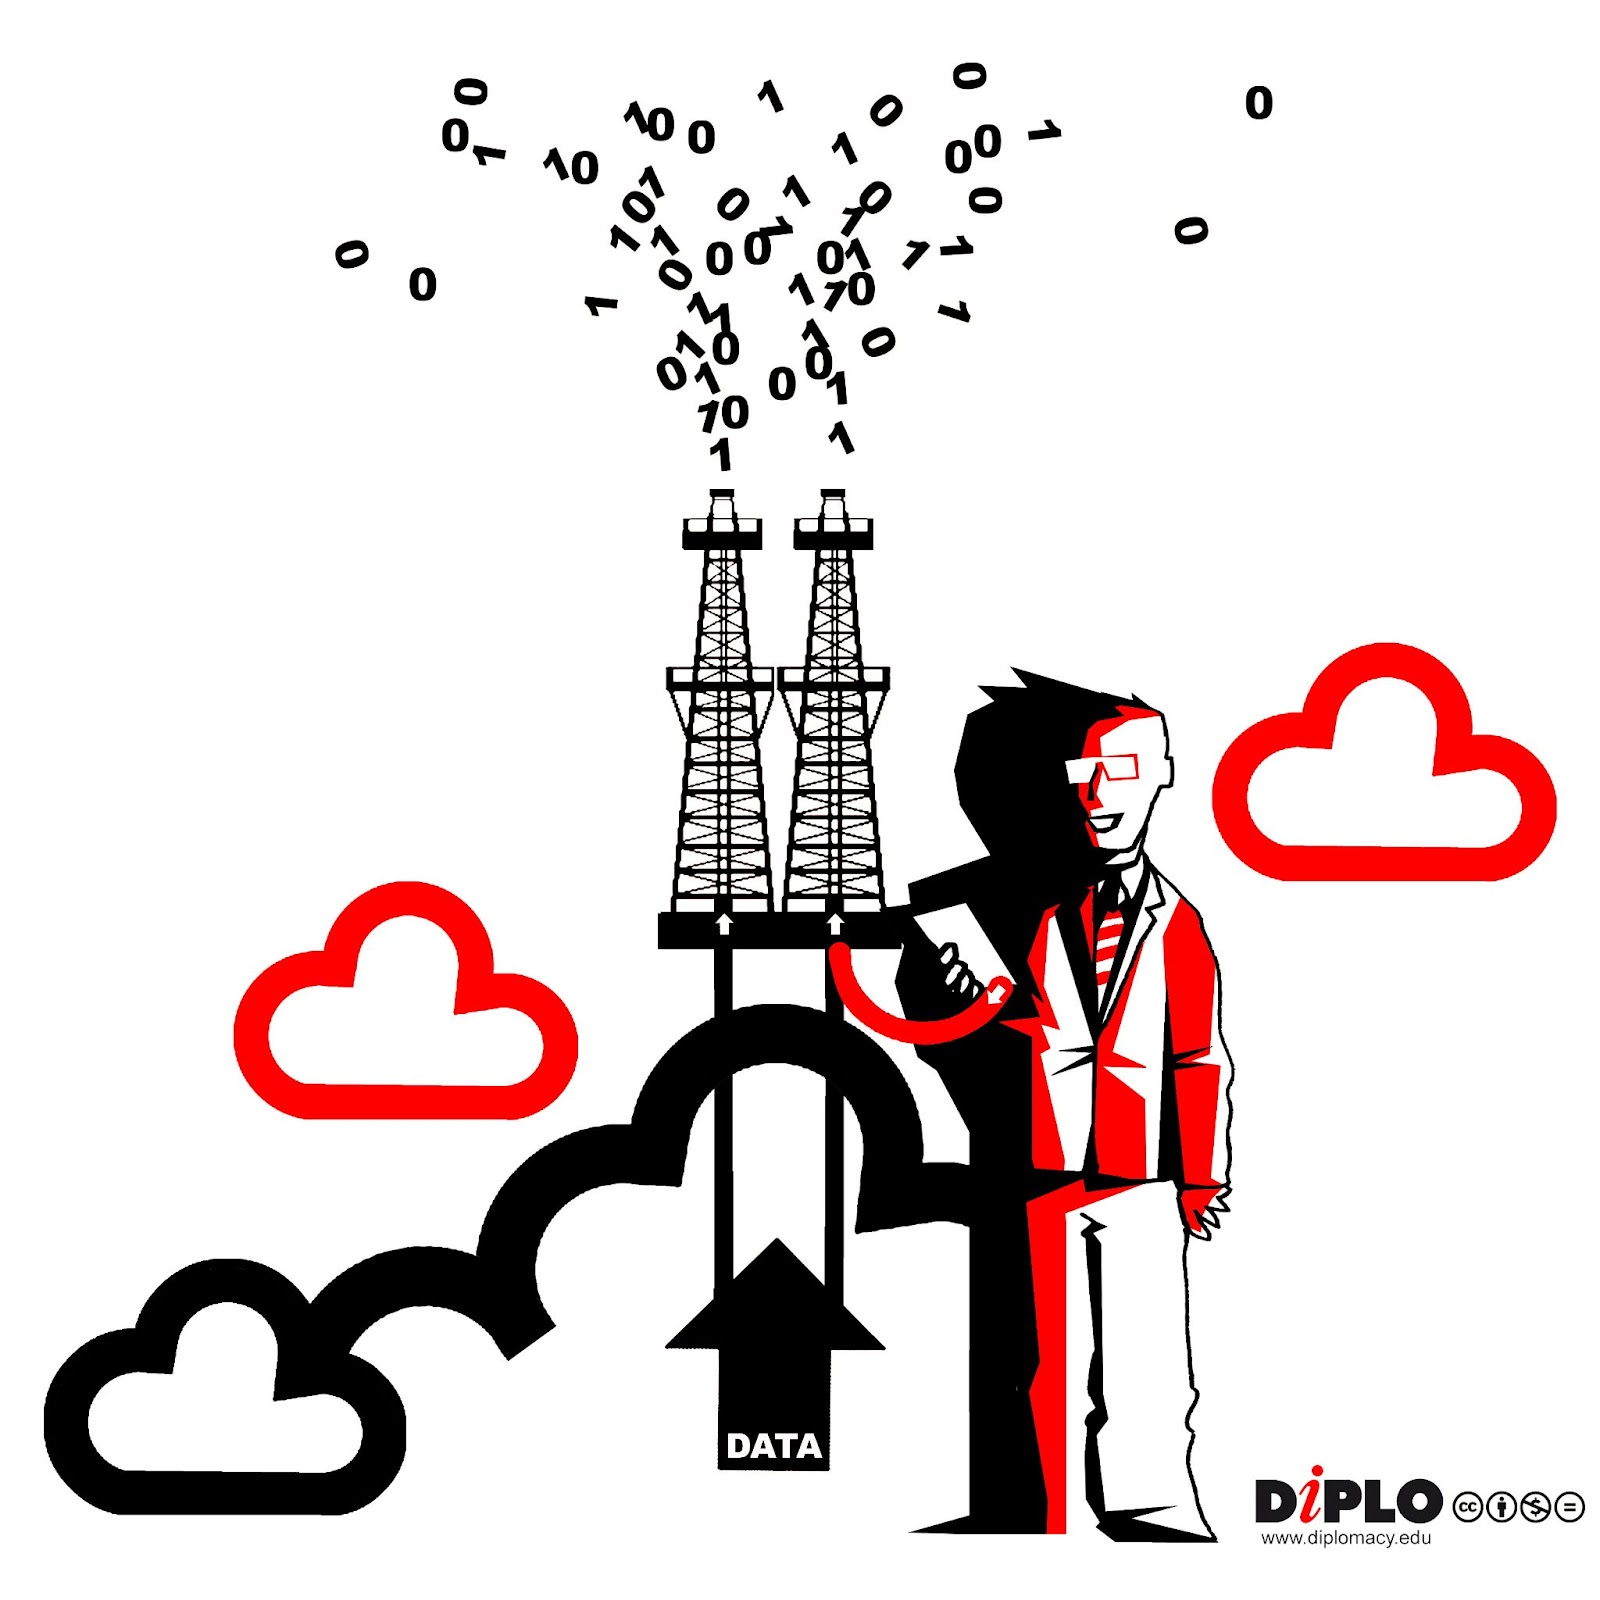 A supervisor checks a paper while surveying data entering clouds and being spewed out of electrical towers as a cloud of 0s and 1s.